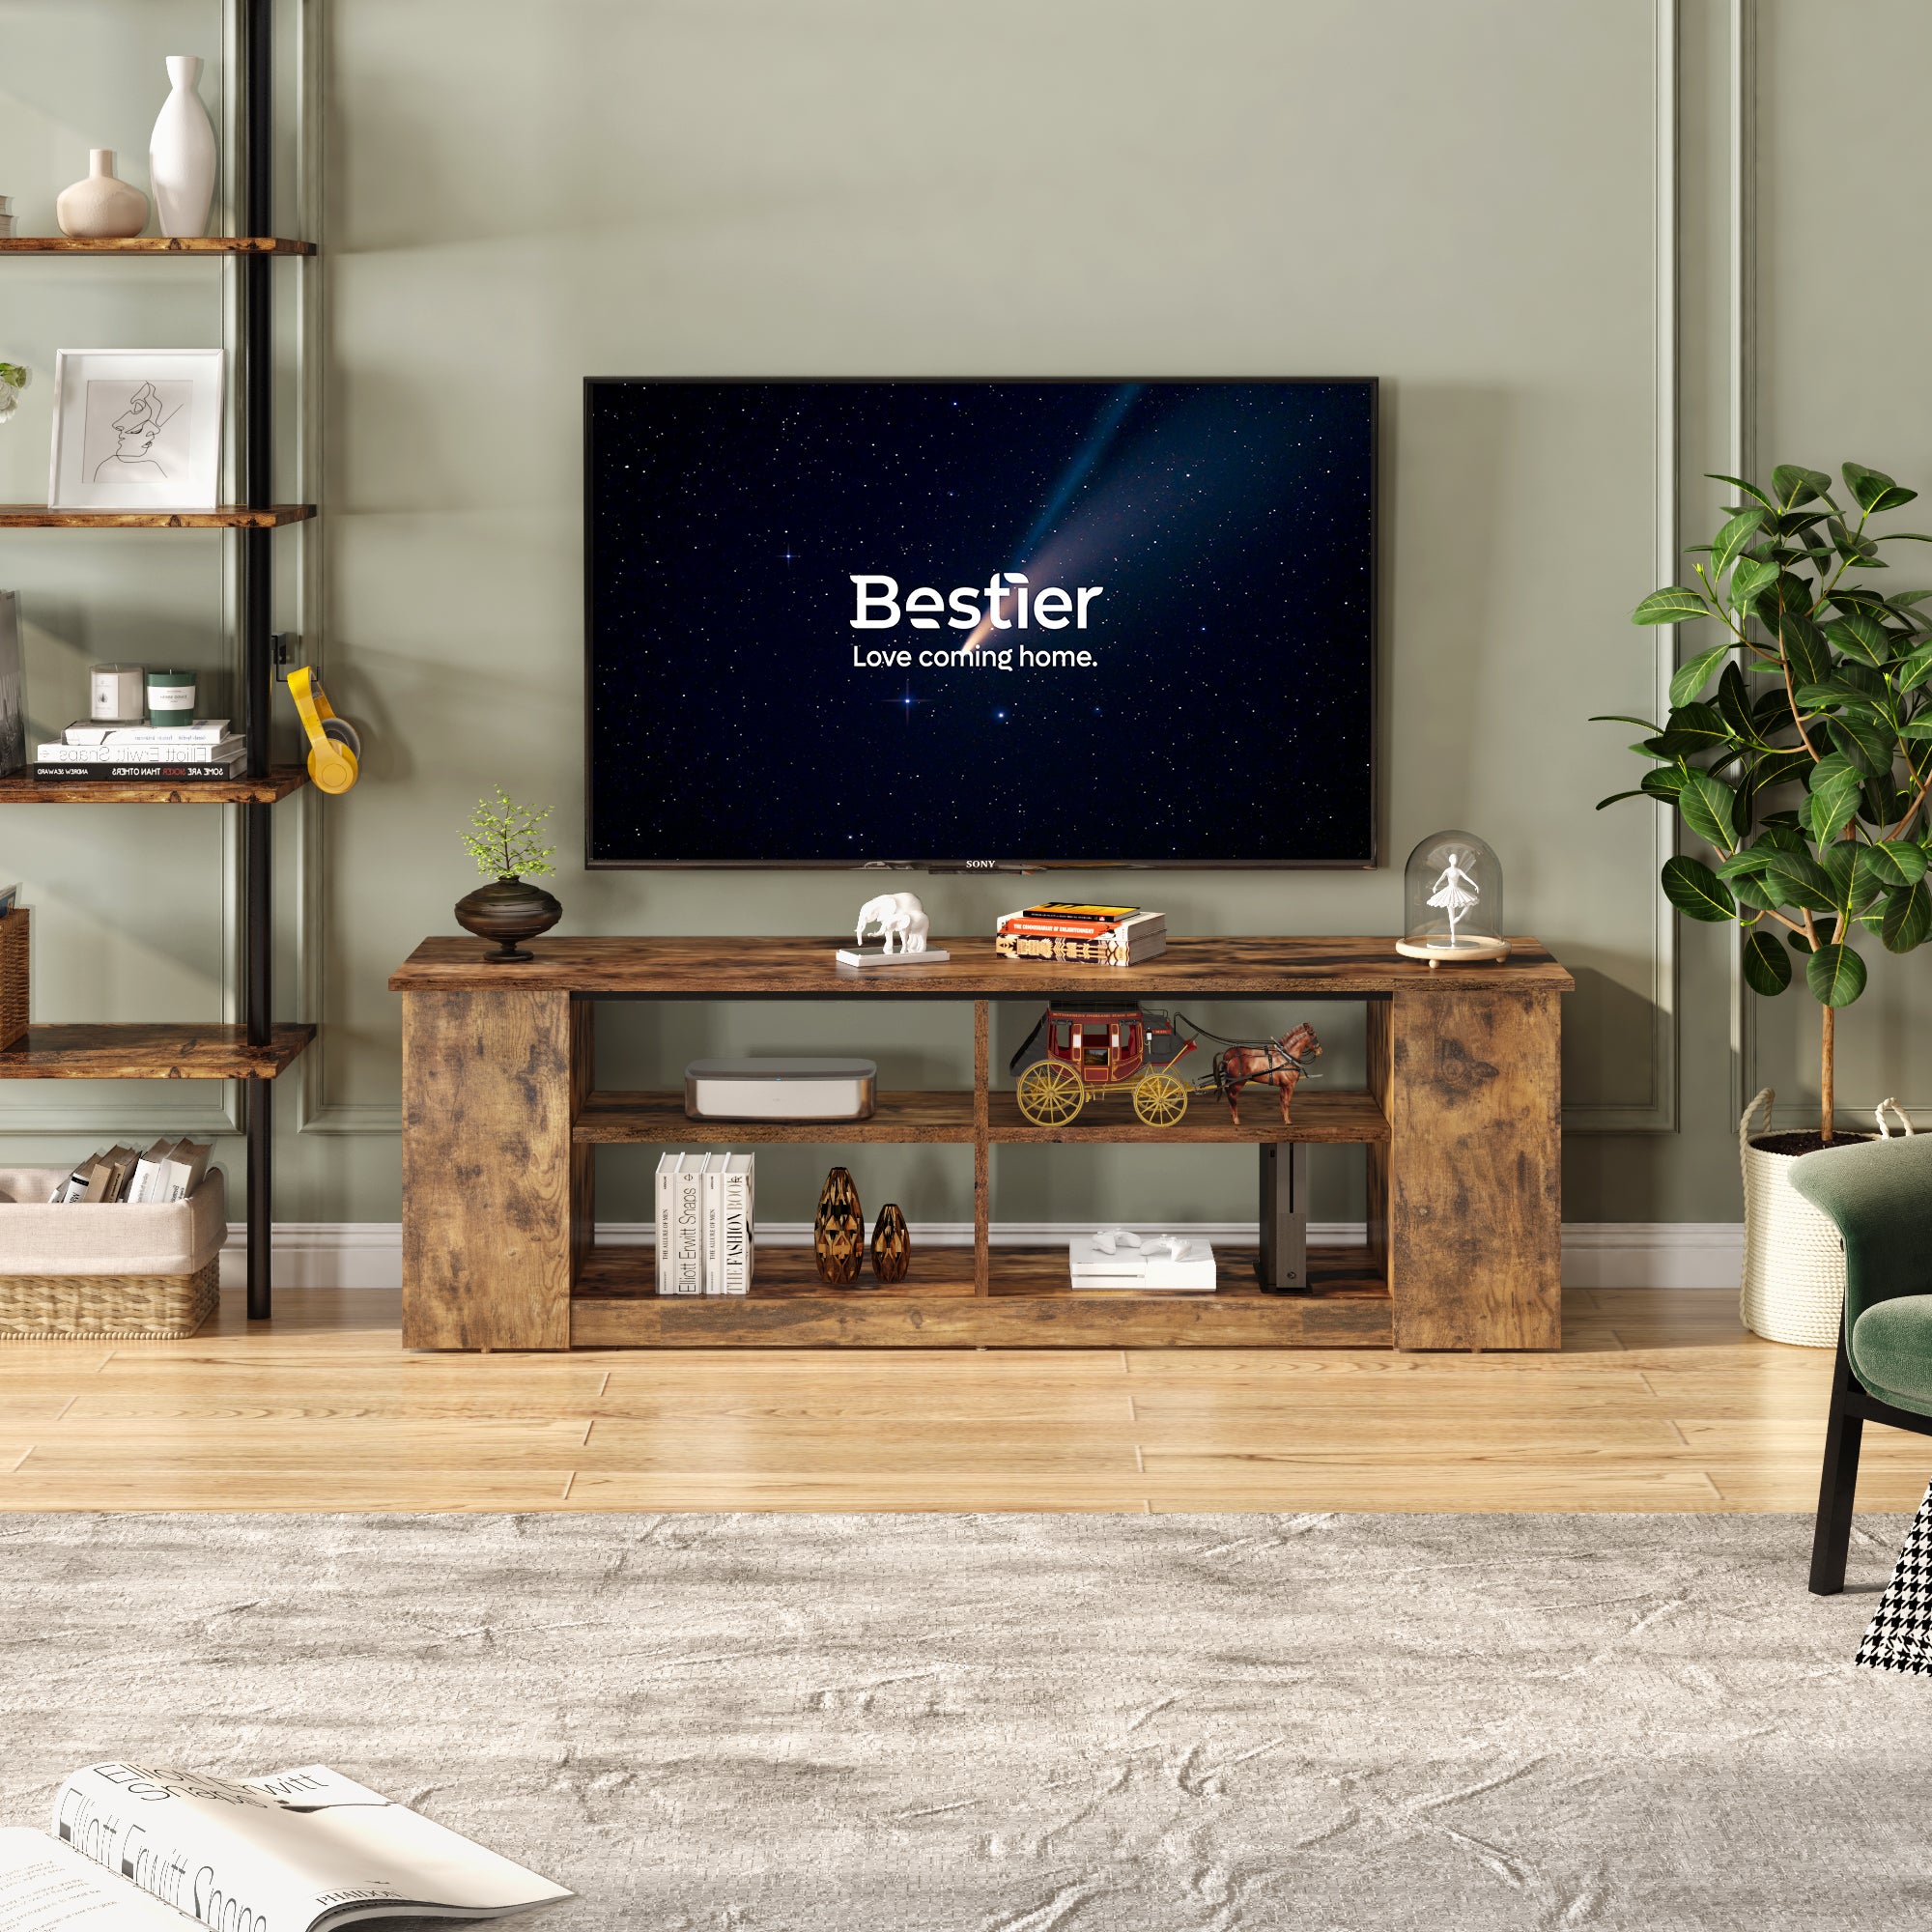 Bestier Up to 50% Off TV Stands: Bestier Farmhouse TV Stand 3-Tier (for TVs up to 60", Brown) $68 & More + Free Shipping